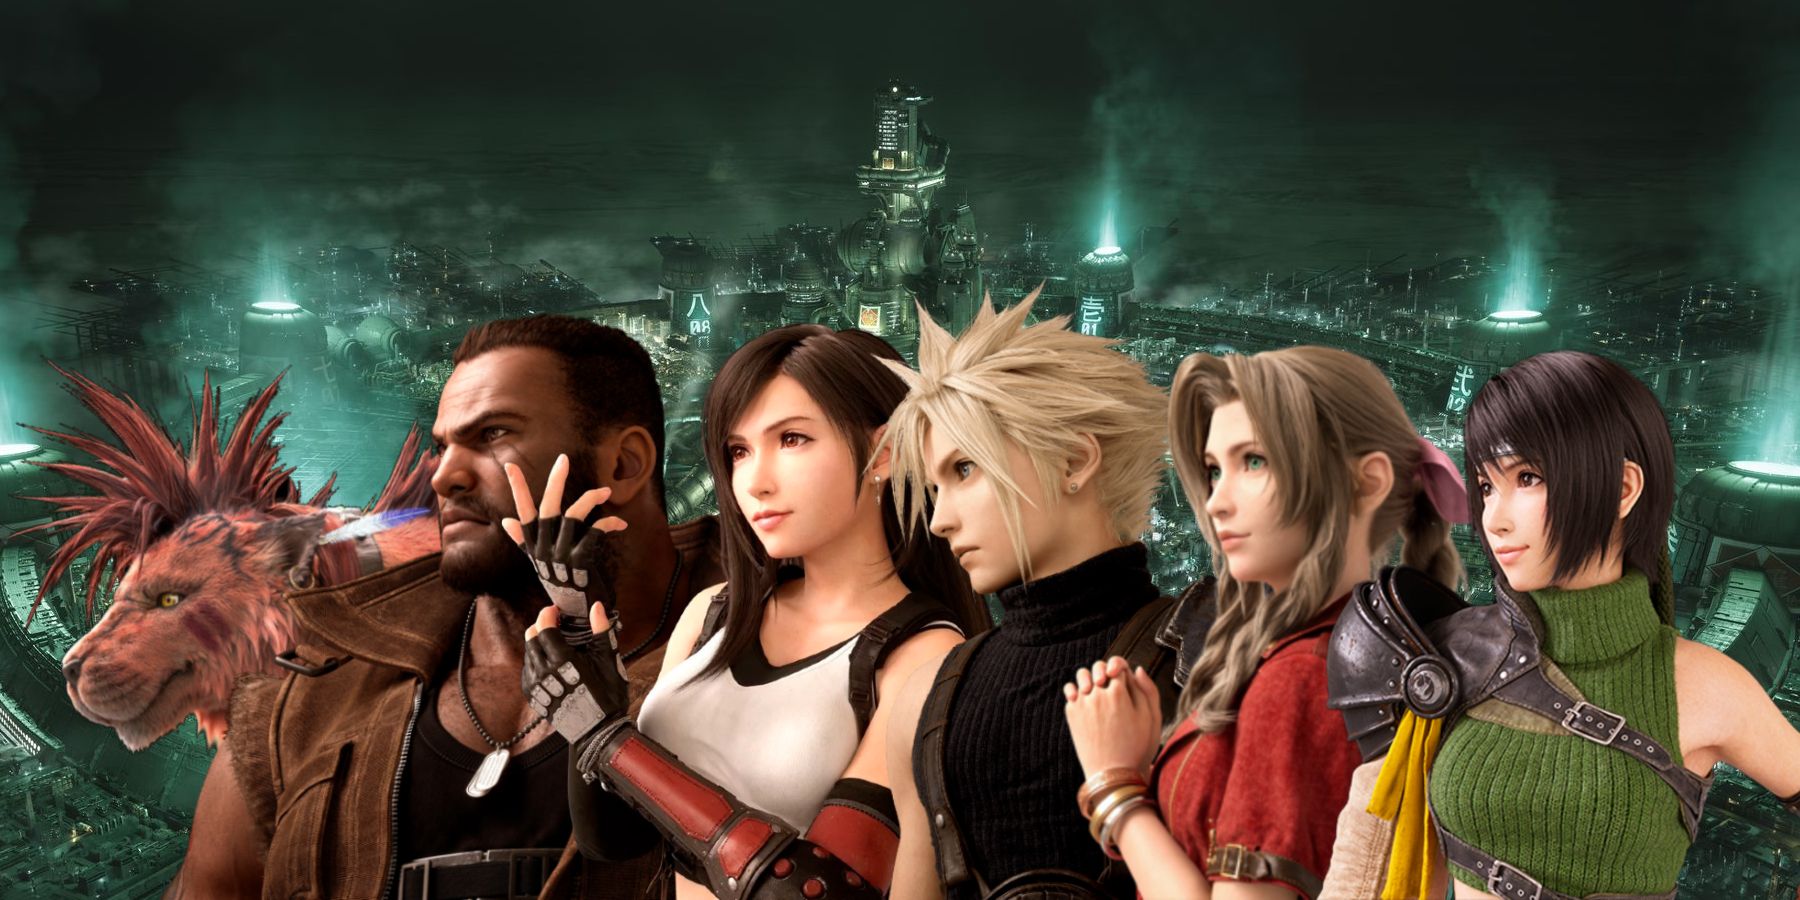 Square Enix says Final Fantasy 7 Remake Part 2 will be revealed this year